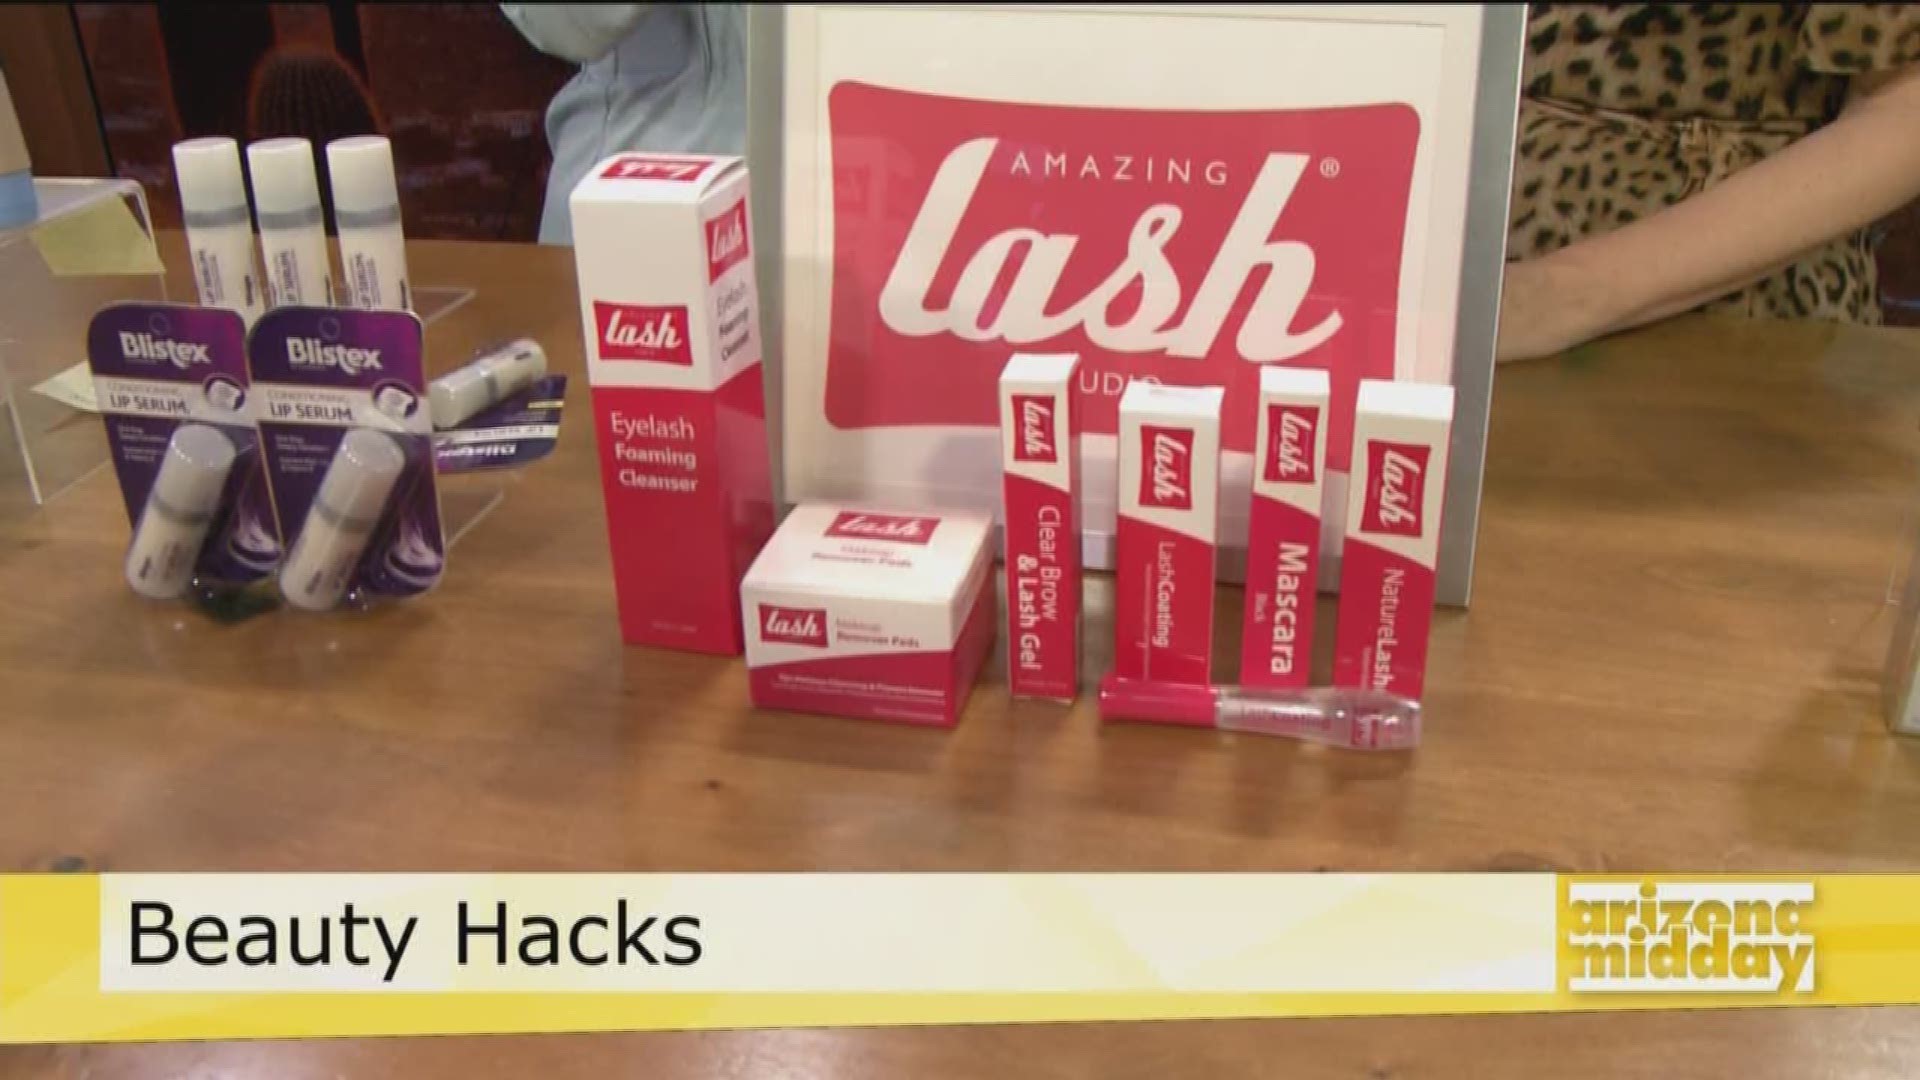 Need to save a little extra time in the morning? Beauty Expert Mickey Williams with sharetheglam.com shows us the best products to help you look amazing in minutes